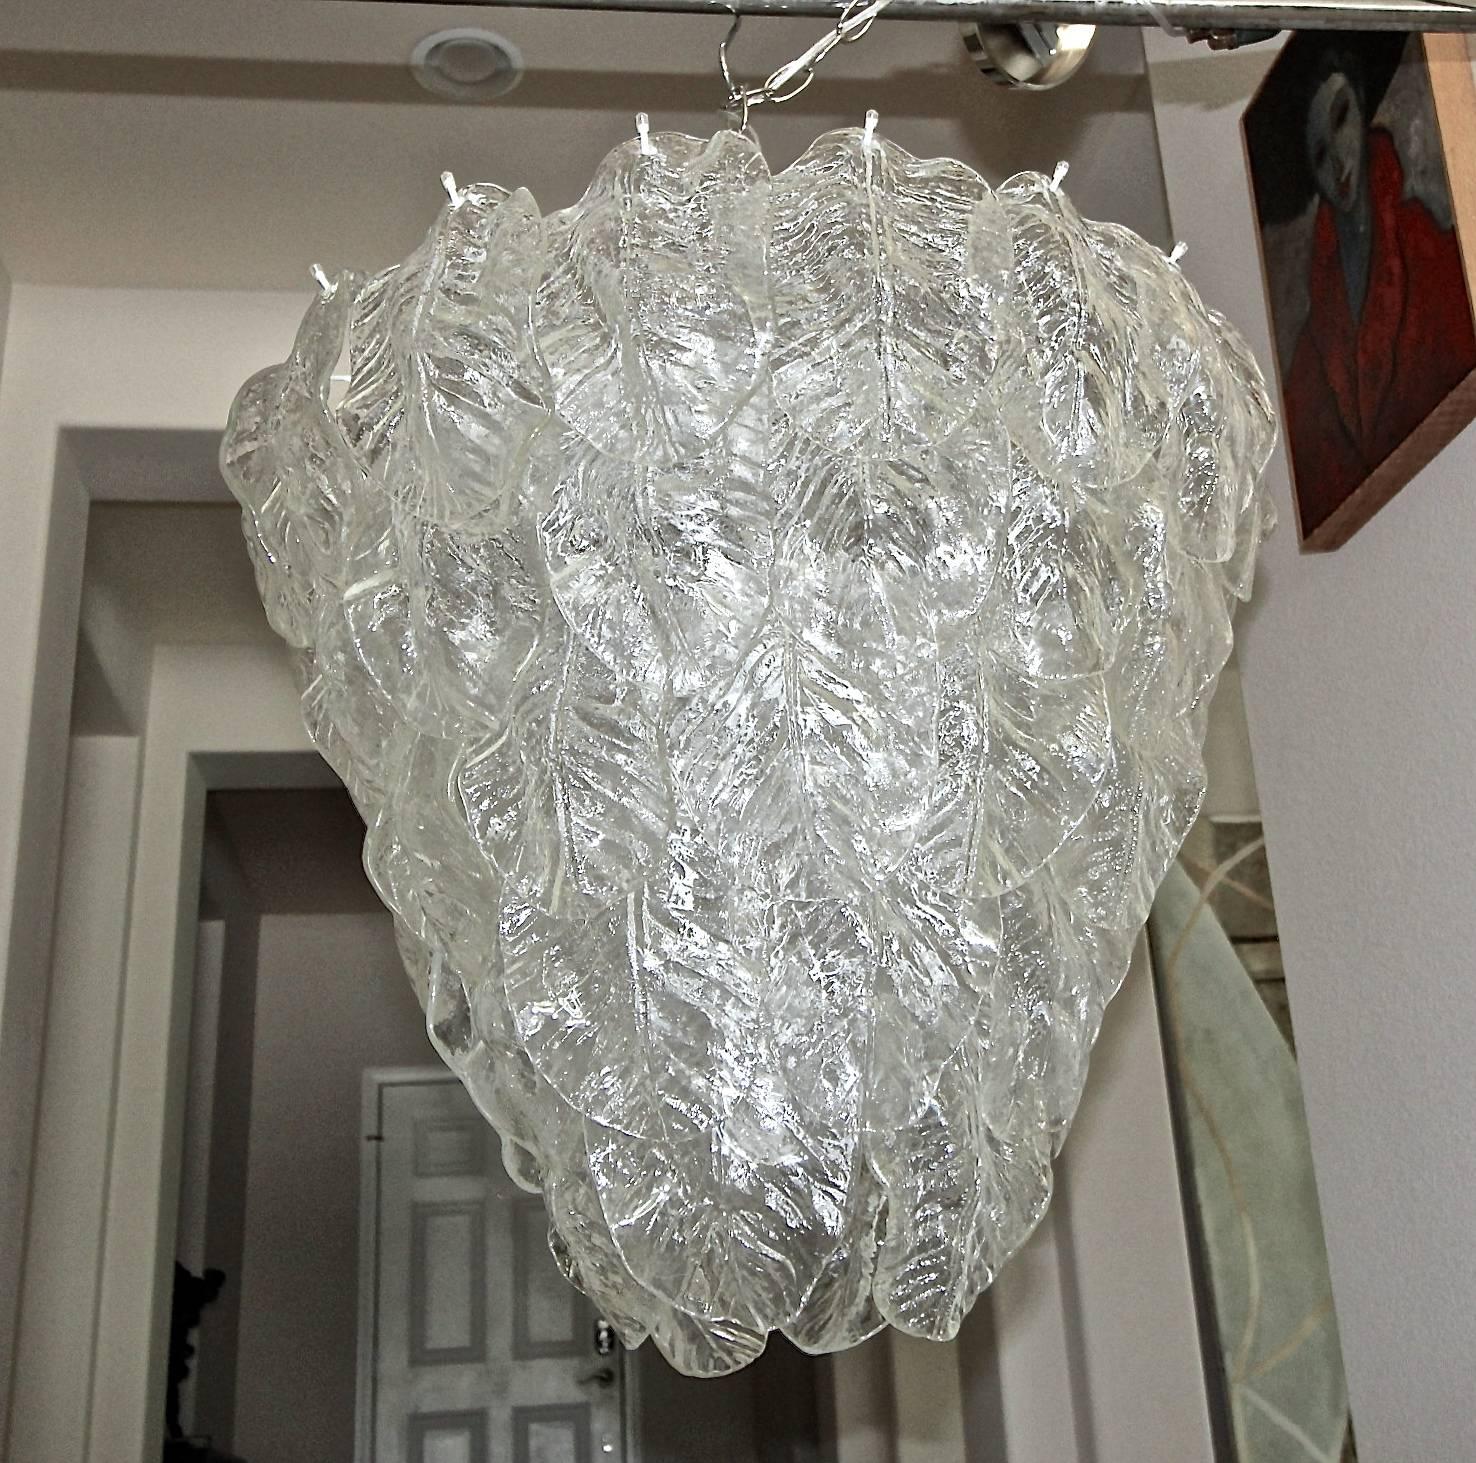 Pair (or sold individually) large Murano chandeliers each with nine-lights and five rows of clear textured glass leaves. Each uses nine 40-watt candelabra size bulbs. The Murano glass leaves are vintage from the 1960s, the white metal frames are